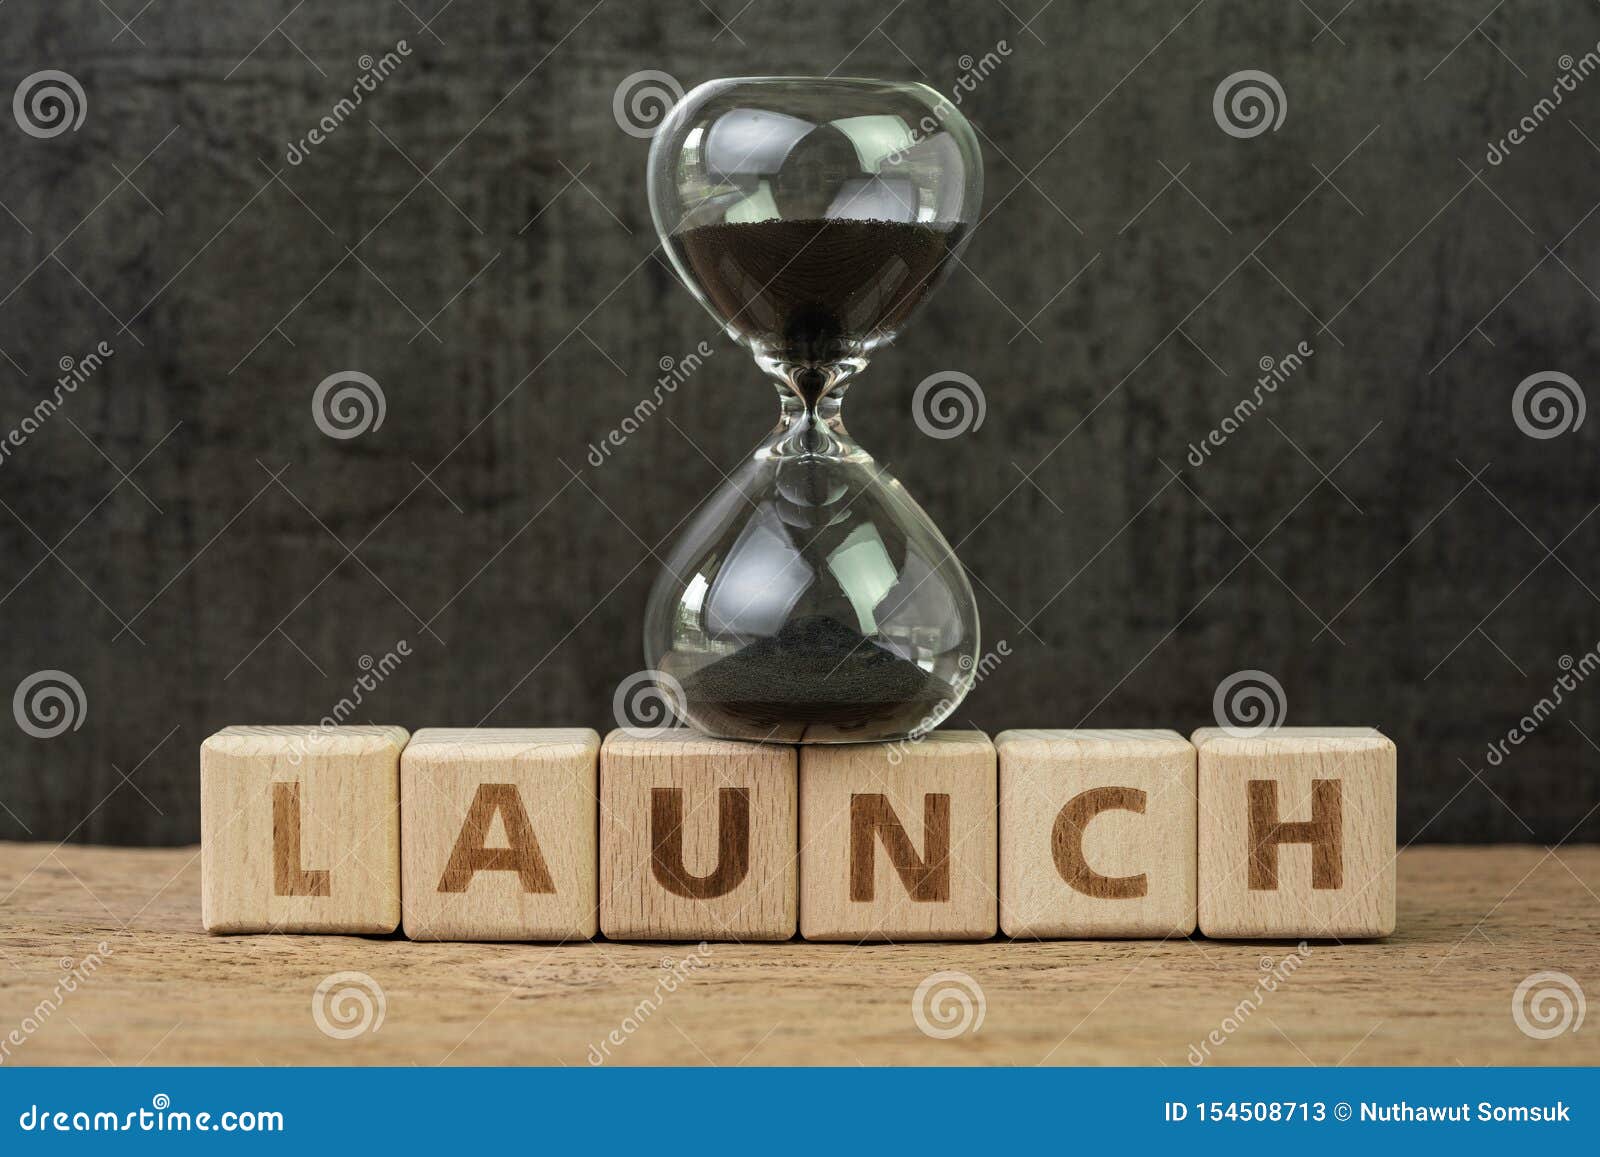 project launch countdown, start business or start up company, hourglass or sandglass on wooden cube block with alphabet building